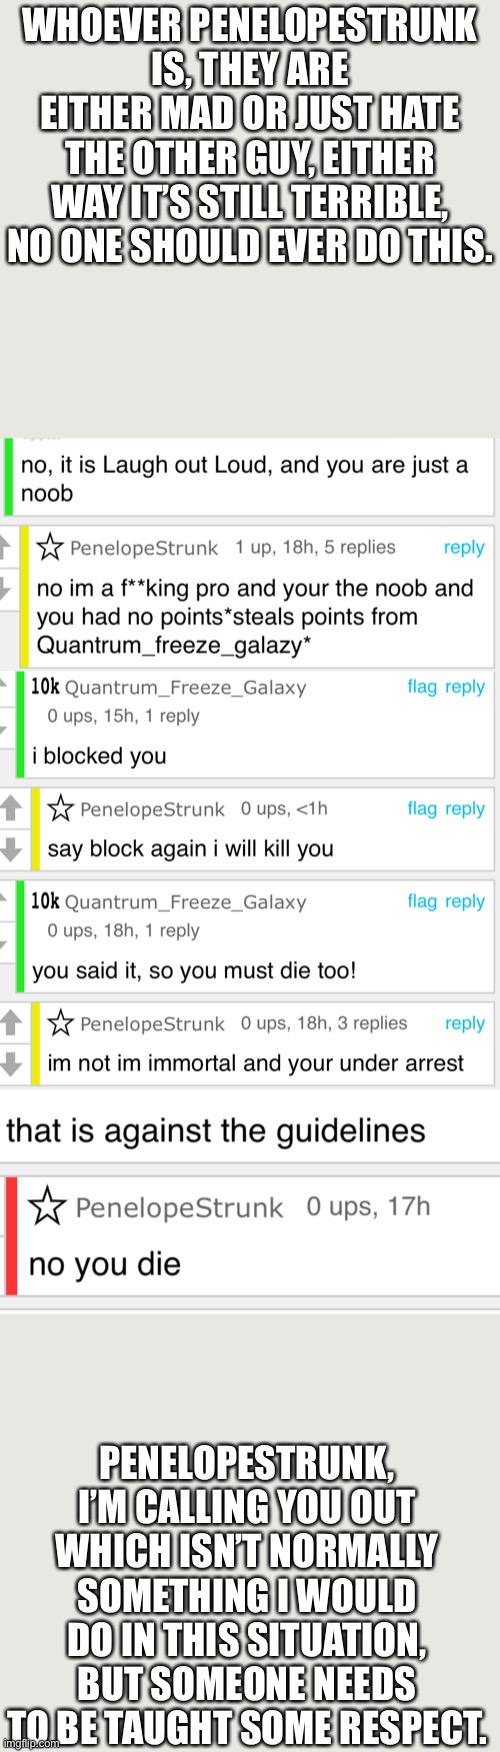 Bruh, we can not bully others please? | WHOEVER PENELOPESTRUNK IS, THEY ARE EITHER MAD OR JUST HATE THE OTHER GUY, EITHER WAY IT’S STILL TERRIBLE, NO ONE SHOULD EVER DO THIS. PENELOPESTRUNK, I’M CALLING YOU OUT WHICH ISN’T NORMALLY SOMETHING I WOULD DO IN THIS SITUATION, BUT SOMEONE NEEDS TO BE TAUGHT SOME RESPECT. | image tagged in bullying,cyberbullying,why,bruh moment | made w/ Imgflip meme maker